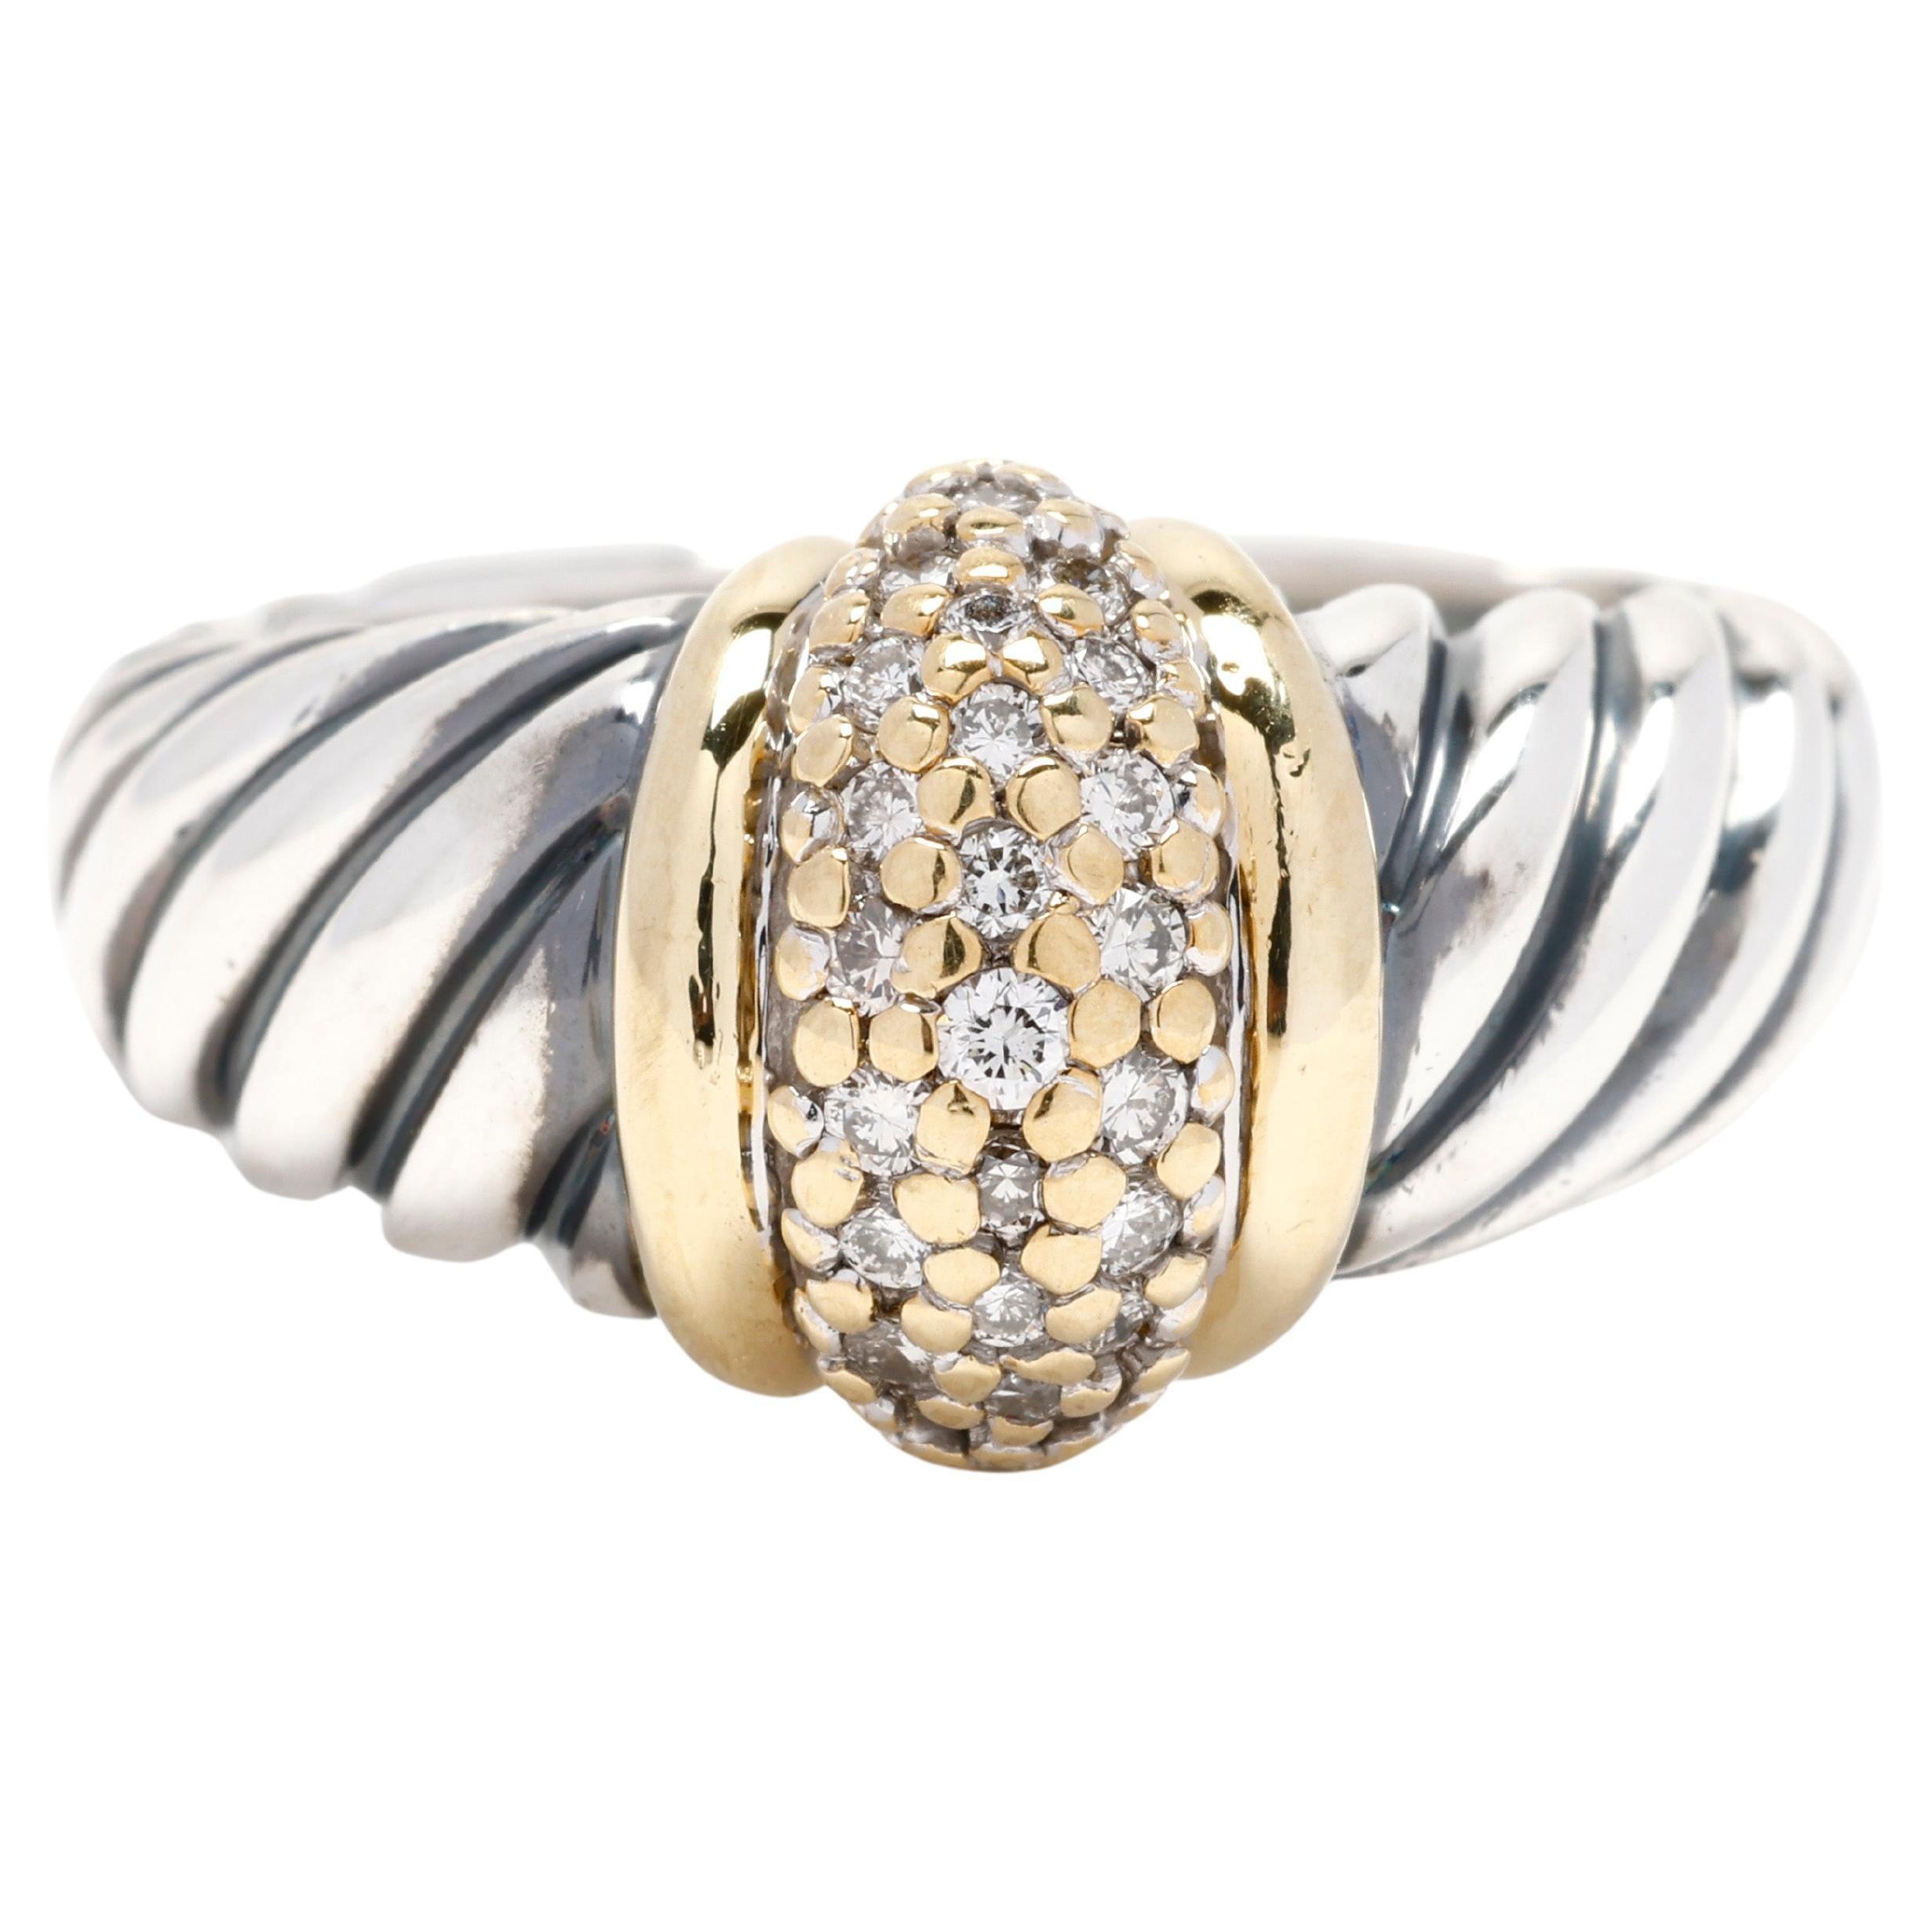 David Yurman Classic Cable Diamond Band Ring 18k Yellow Gold and Sterling Silver